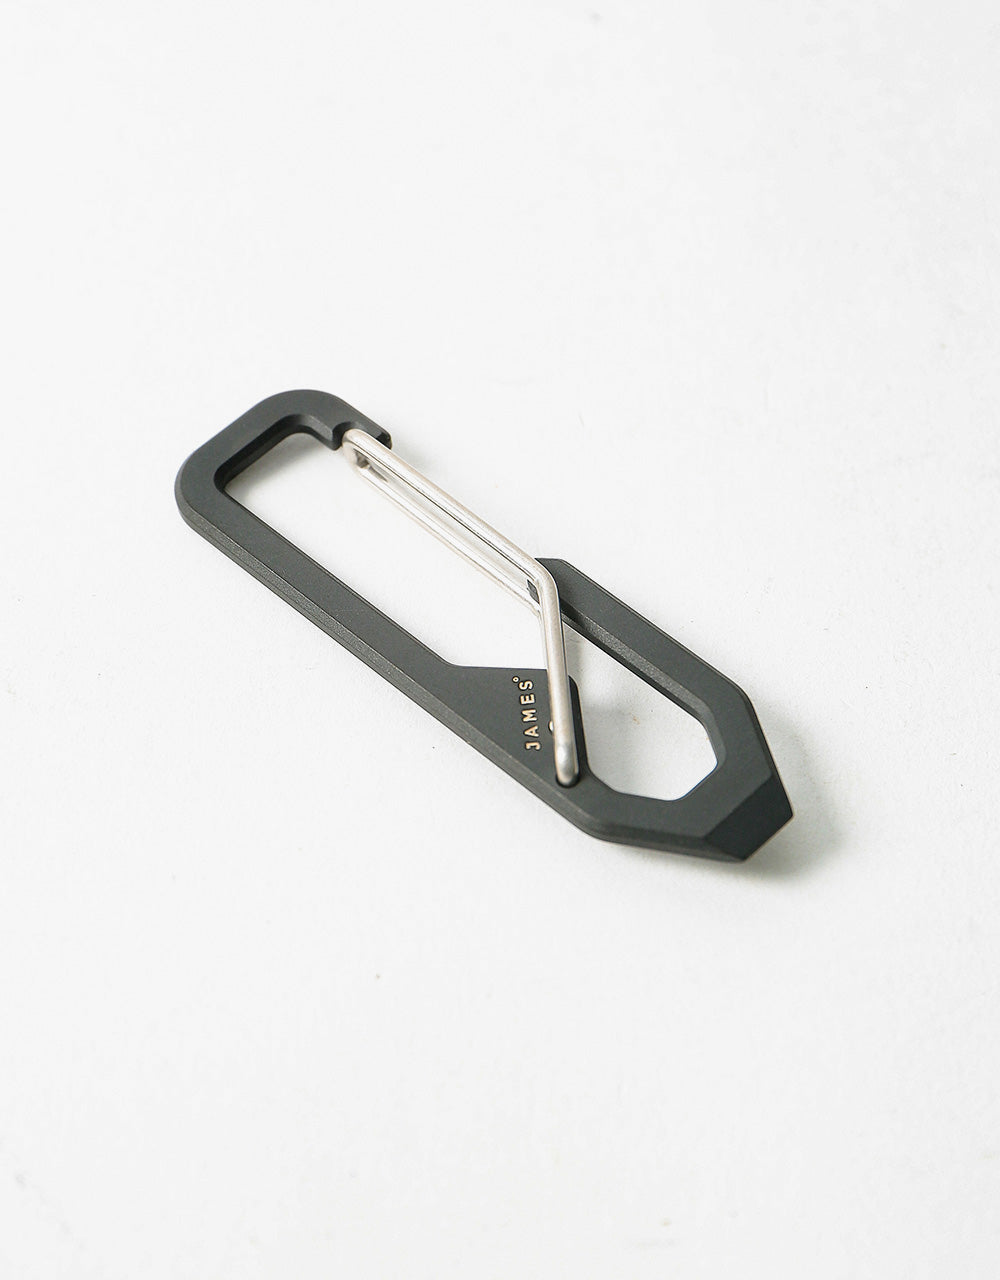 James The Holcombe Keychain - Black/Stainless